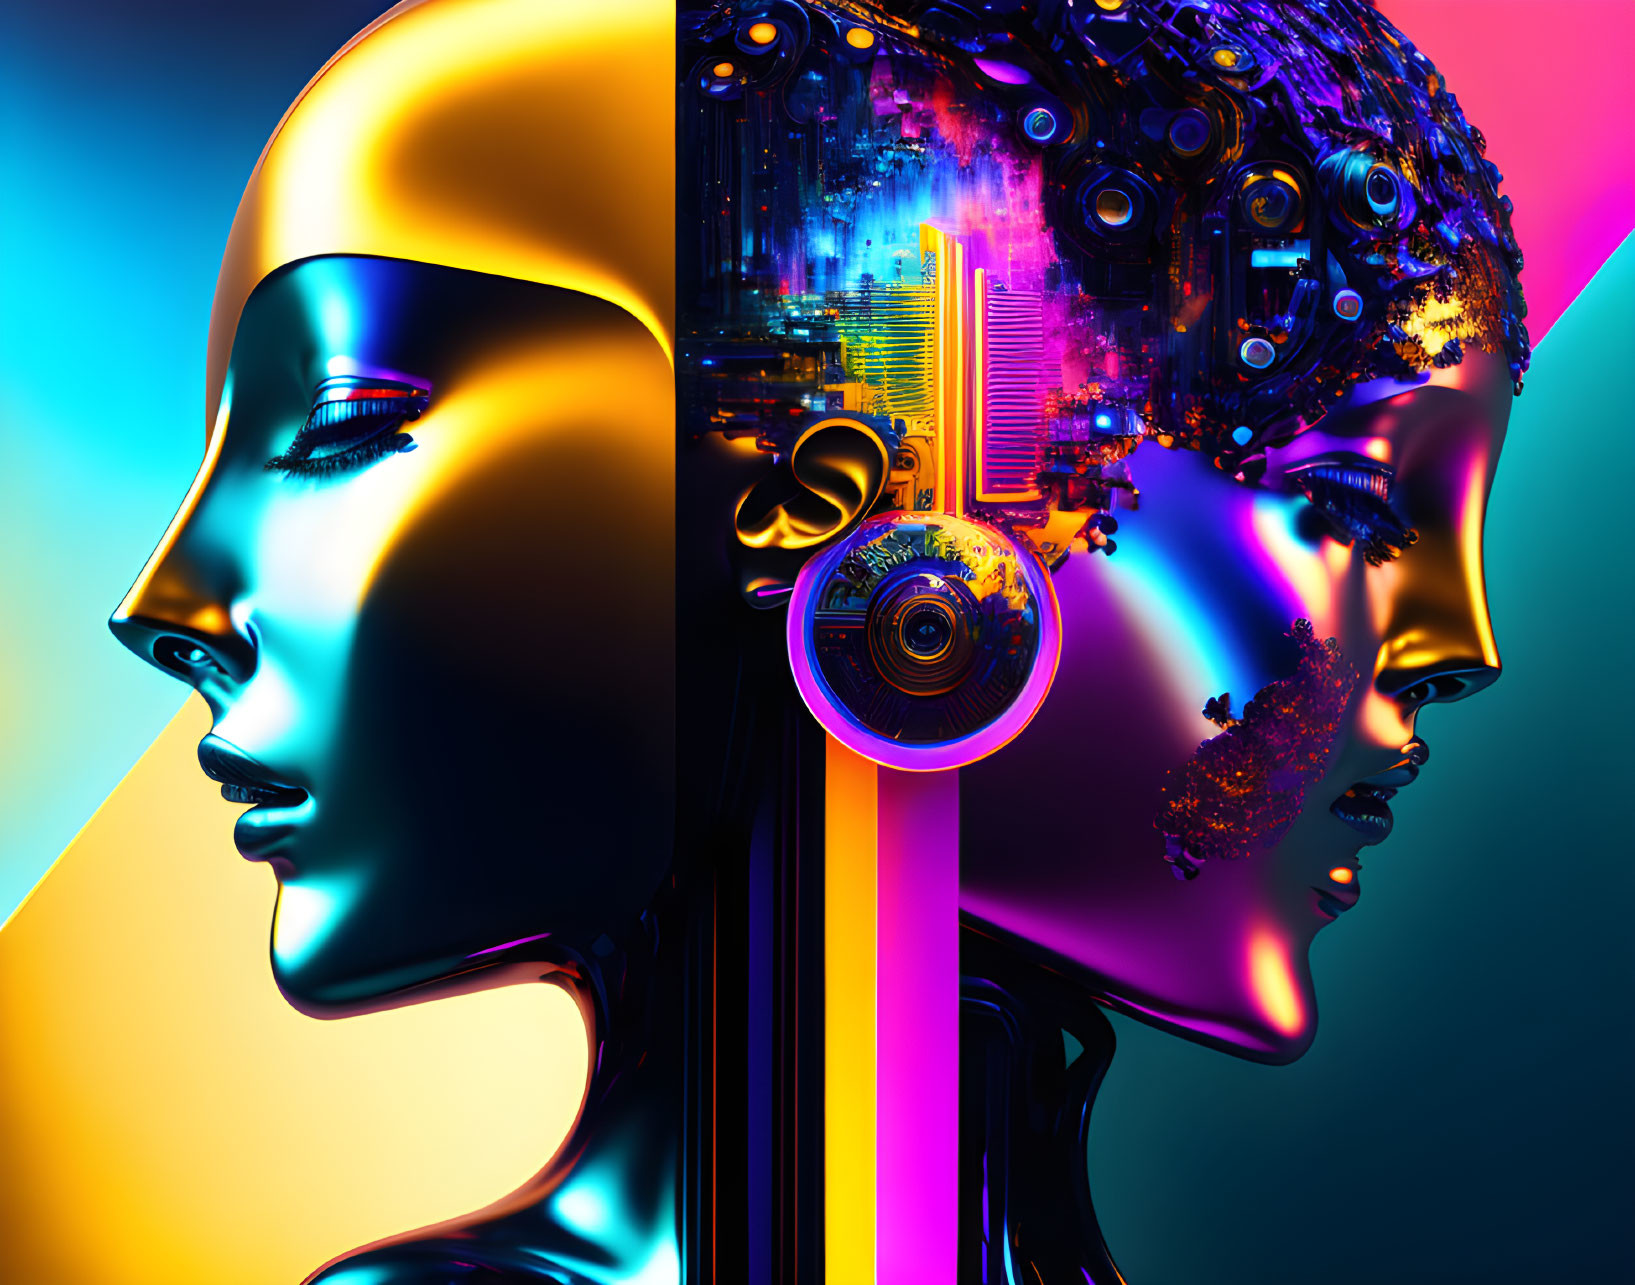 Colorful artwork featuring contrasting golden and cybernetic faces on multicolored background